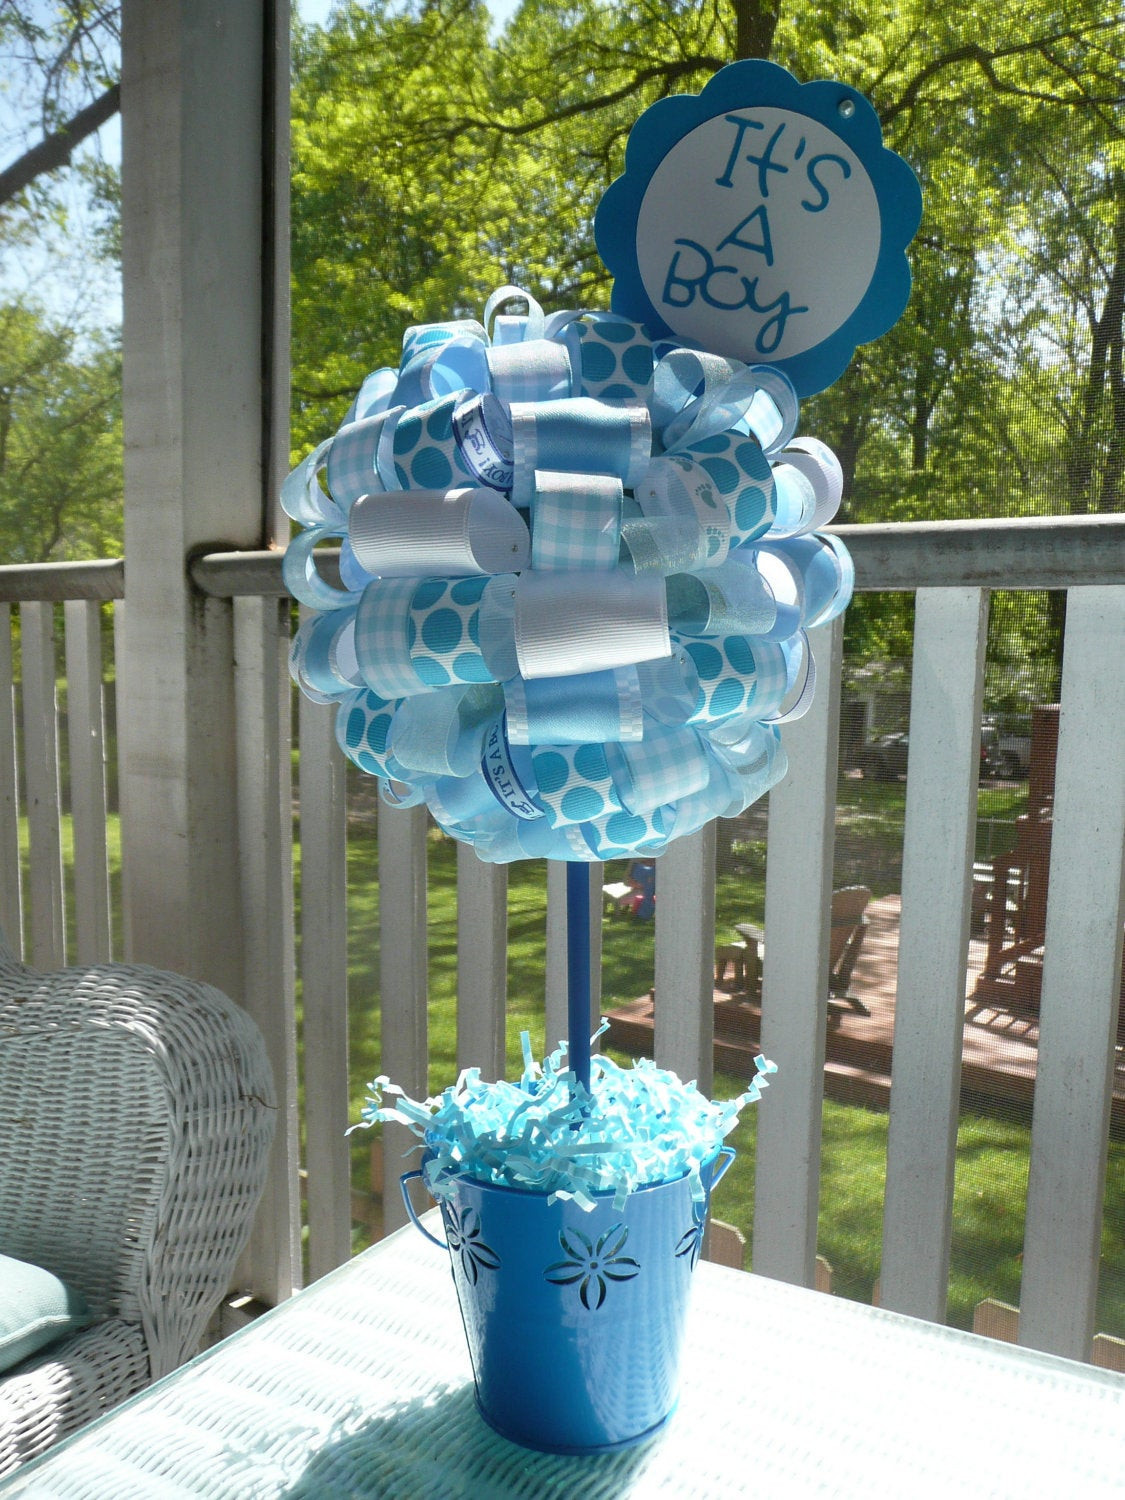 Baby Boy Shower Decorations Ideas
 It s a Boy Baby Blue and White Ribbon Centerpiece Topiary